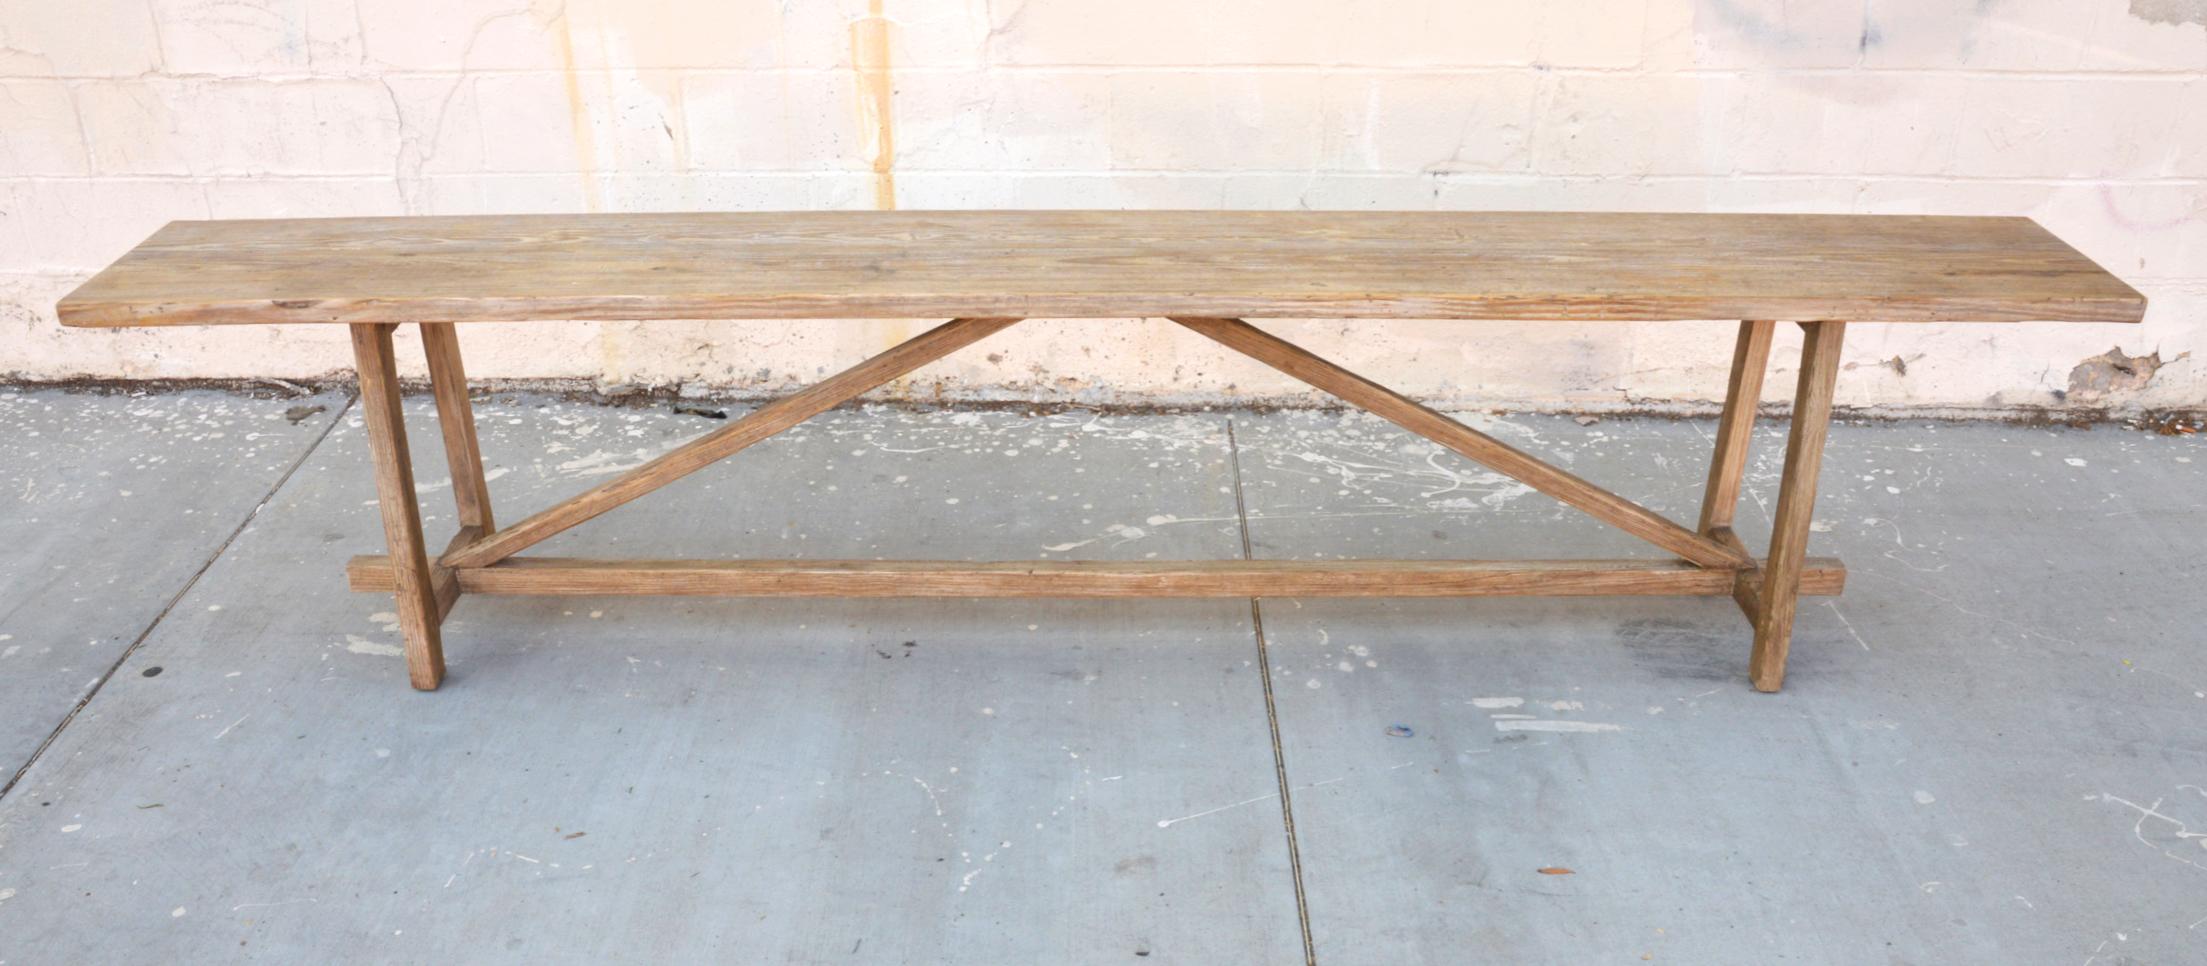 This reclaimed pine console table is seen here in 96